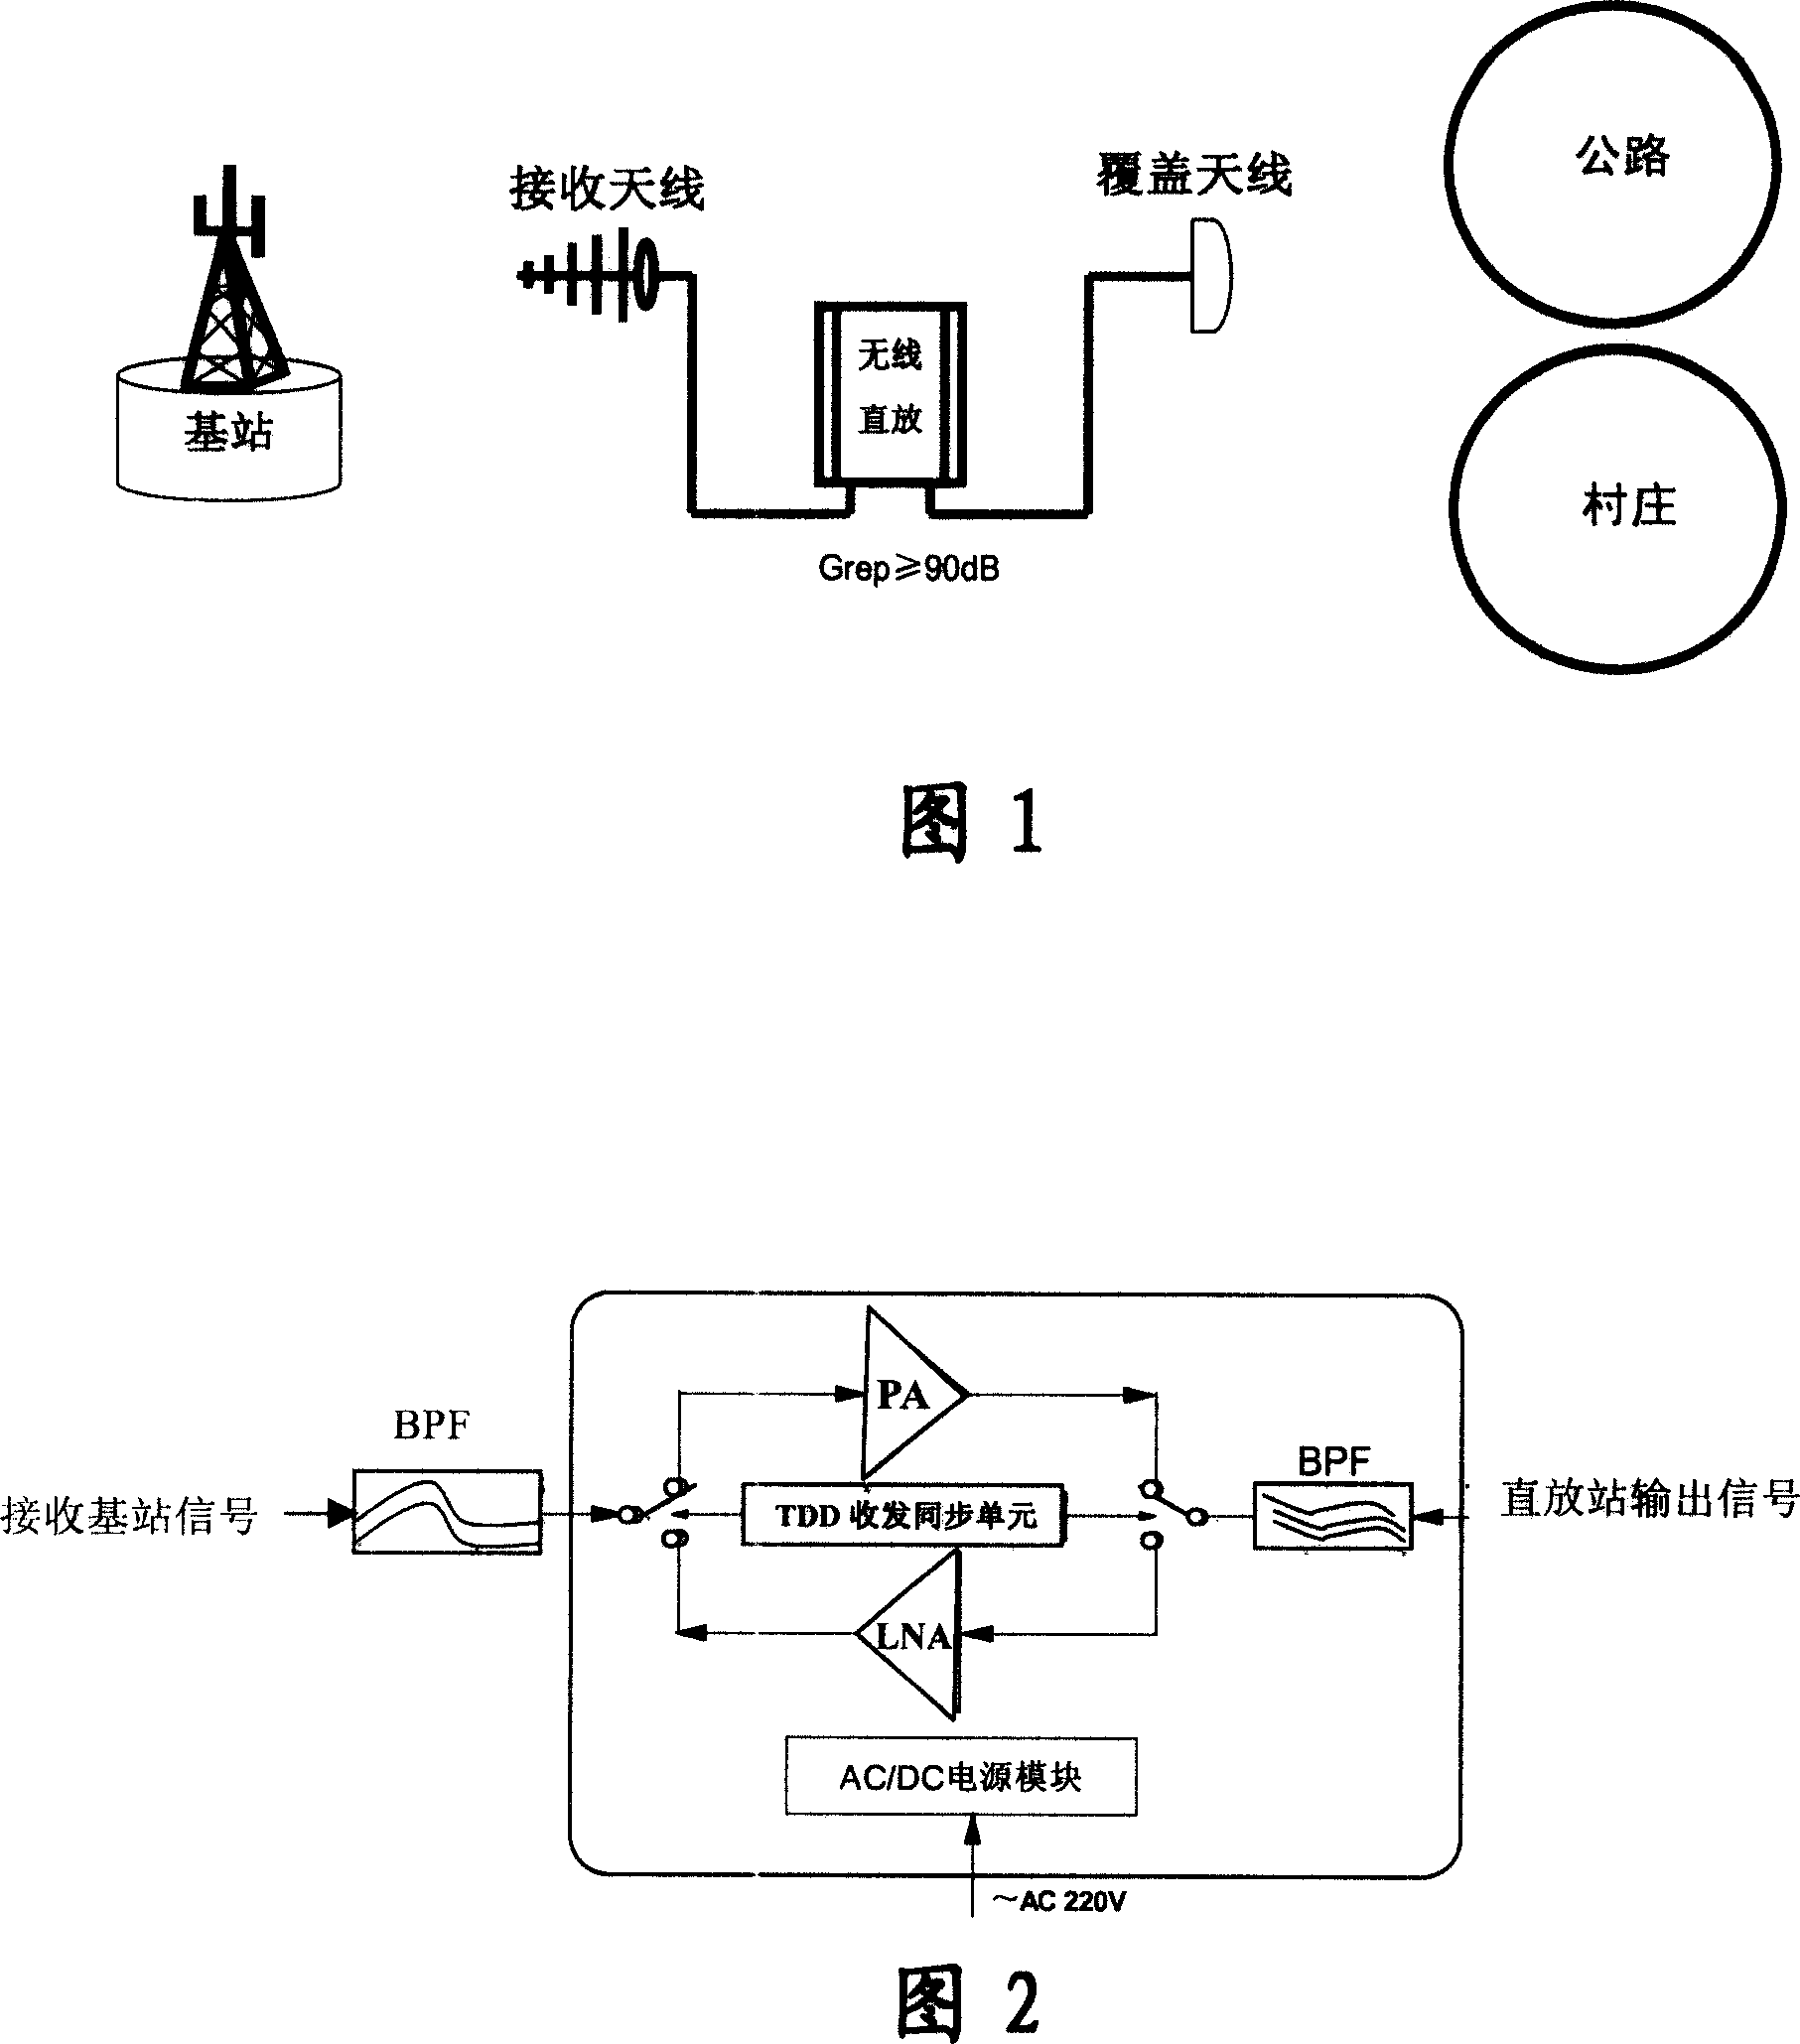 Microwave repeater station and communication method based on SCDMA microwave repeater station